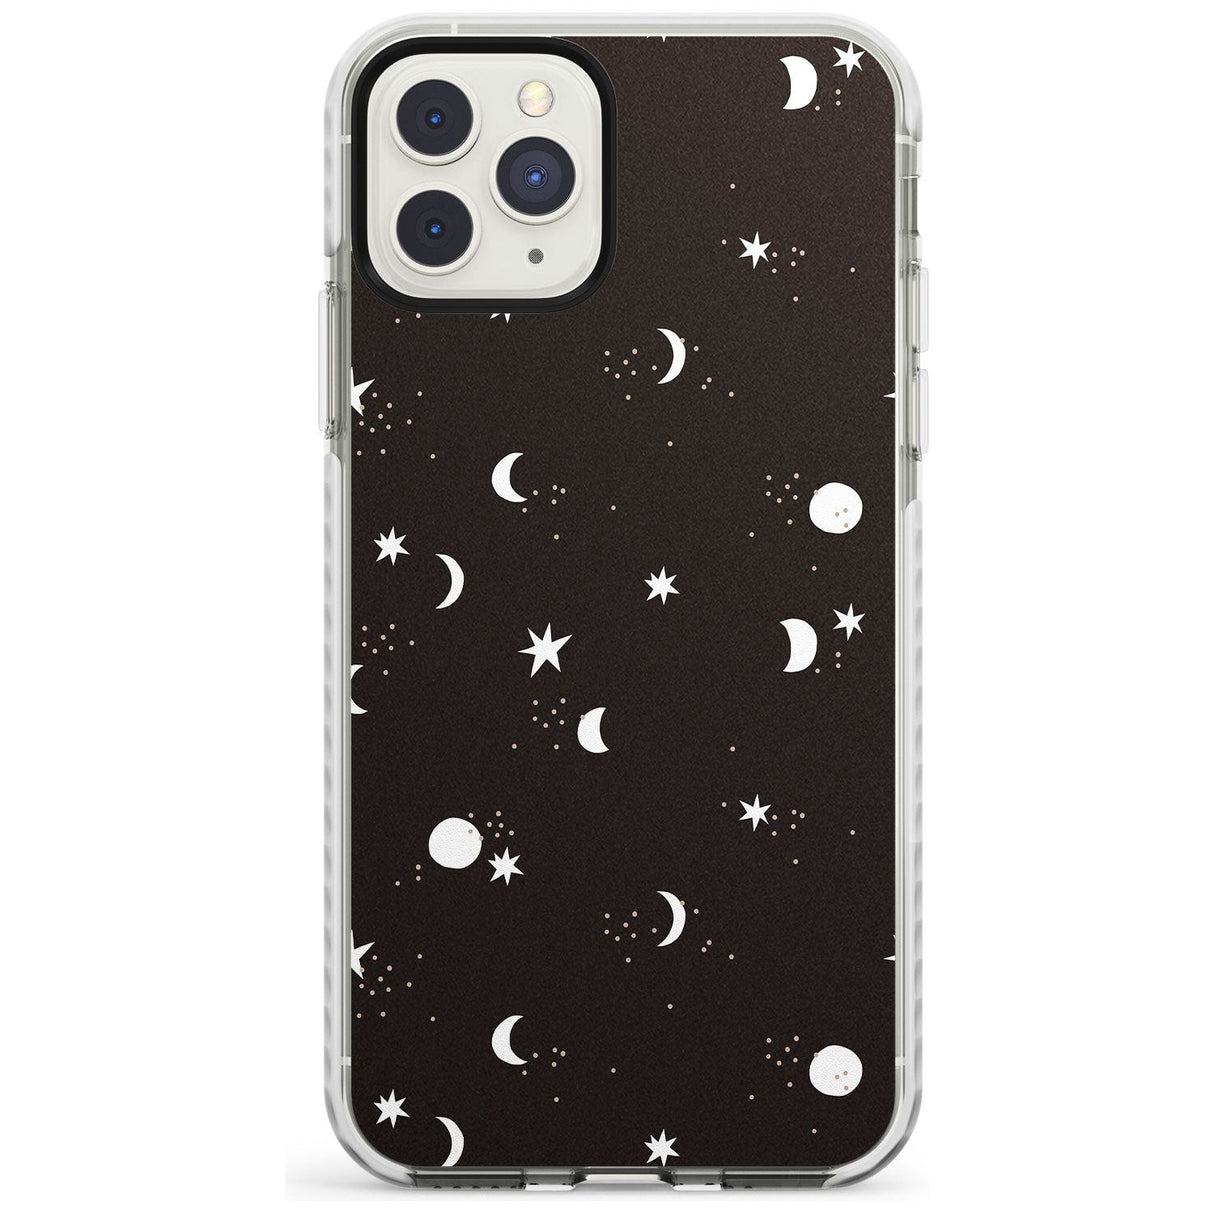 Funky Moons & Stars Phone Case iPhone 11 Pro Max / Impact Case,iPhone 11 Pro / Impact Case,iPhone 12 Pro / Impact Case,iPhone 12 Pro Max / Impact Case Blanc Space